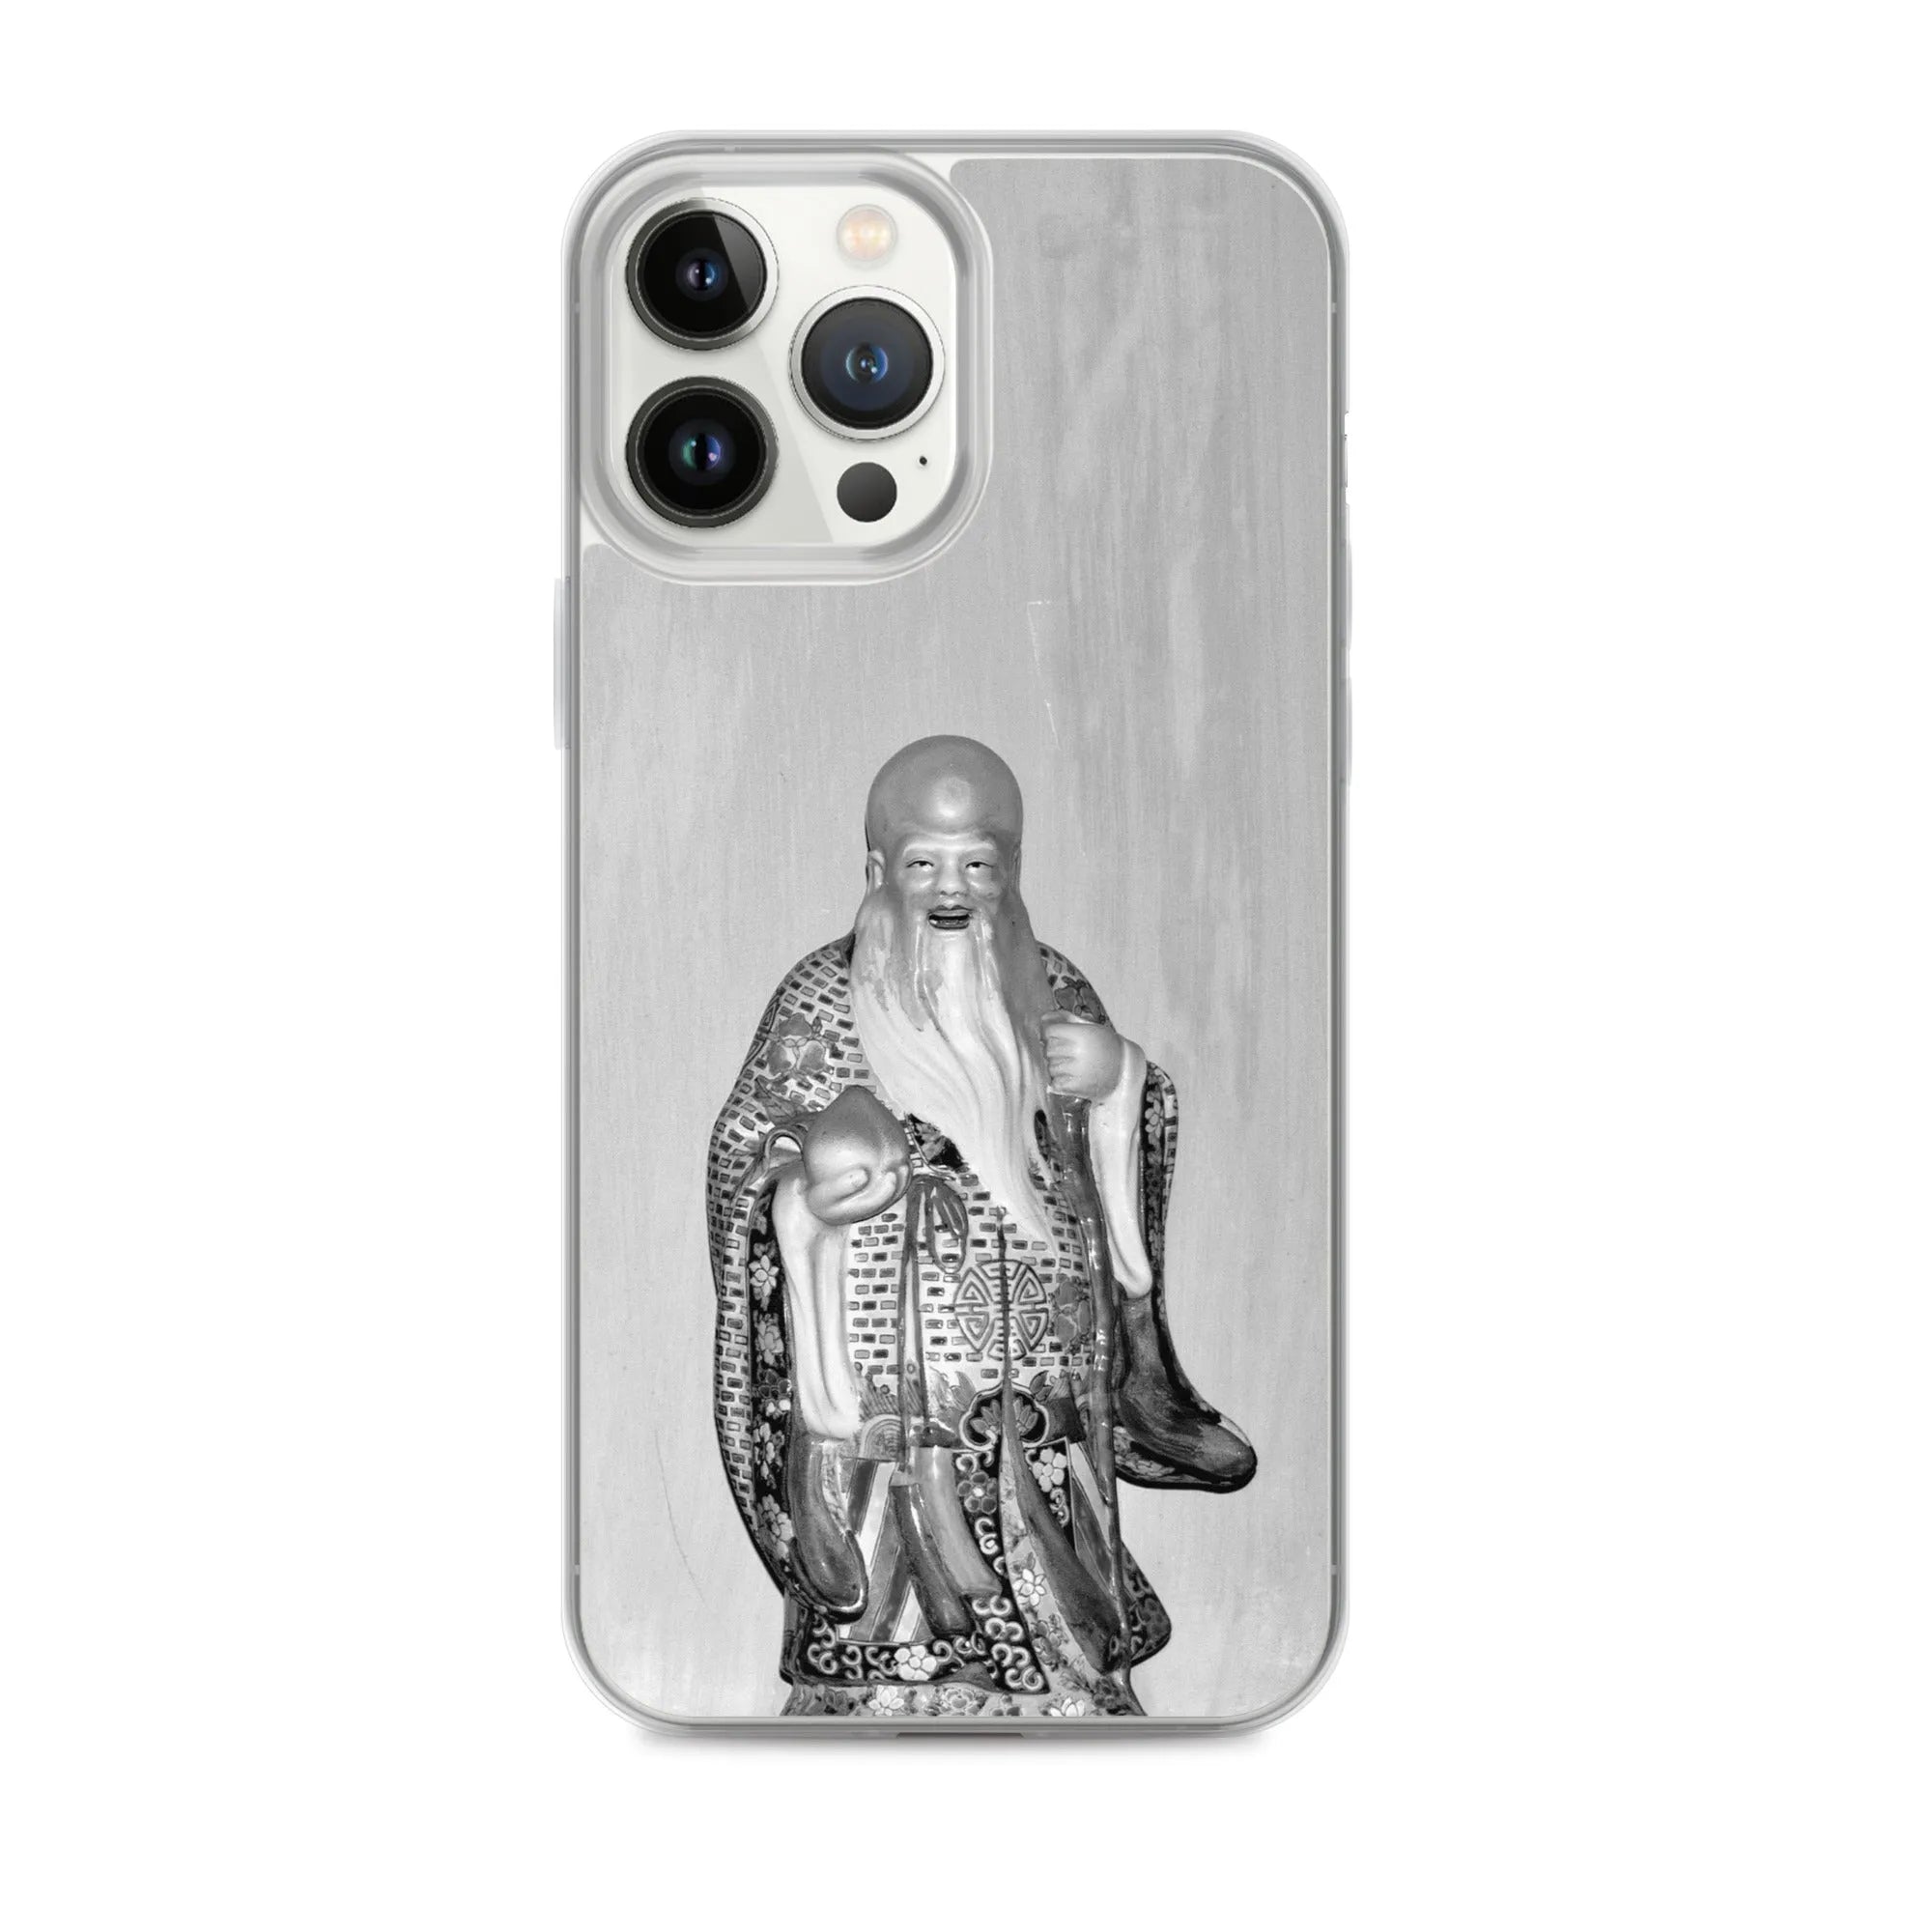 Flying Solo - Designer Travels Art Iphone Case - Black And White - Iphone 13 Pro Max - Mobile Phone Cases - Aesthetic